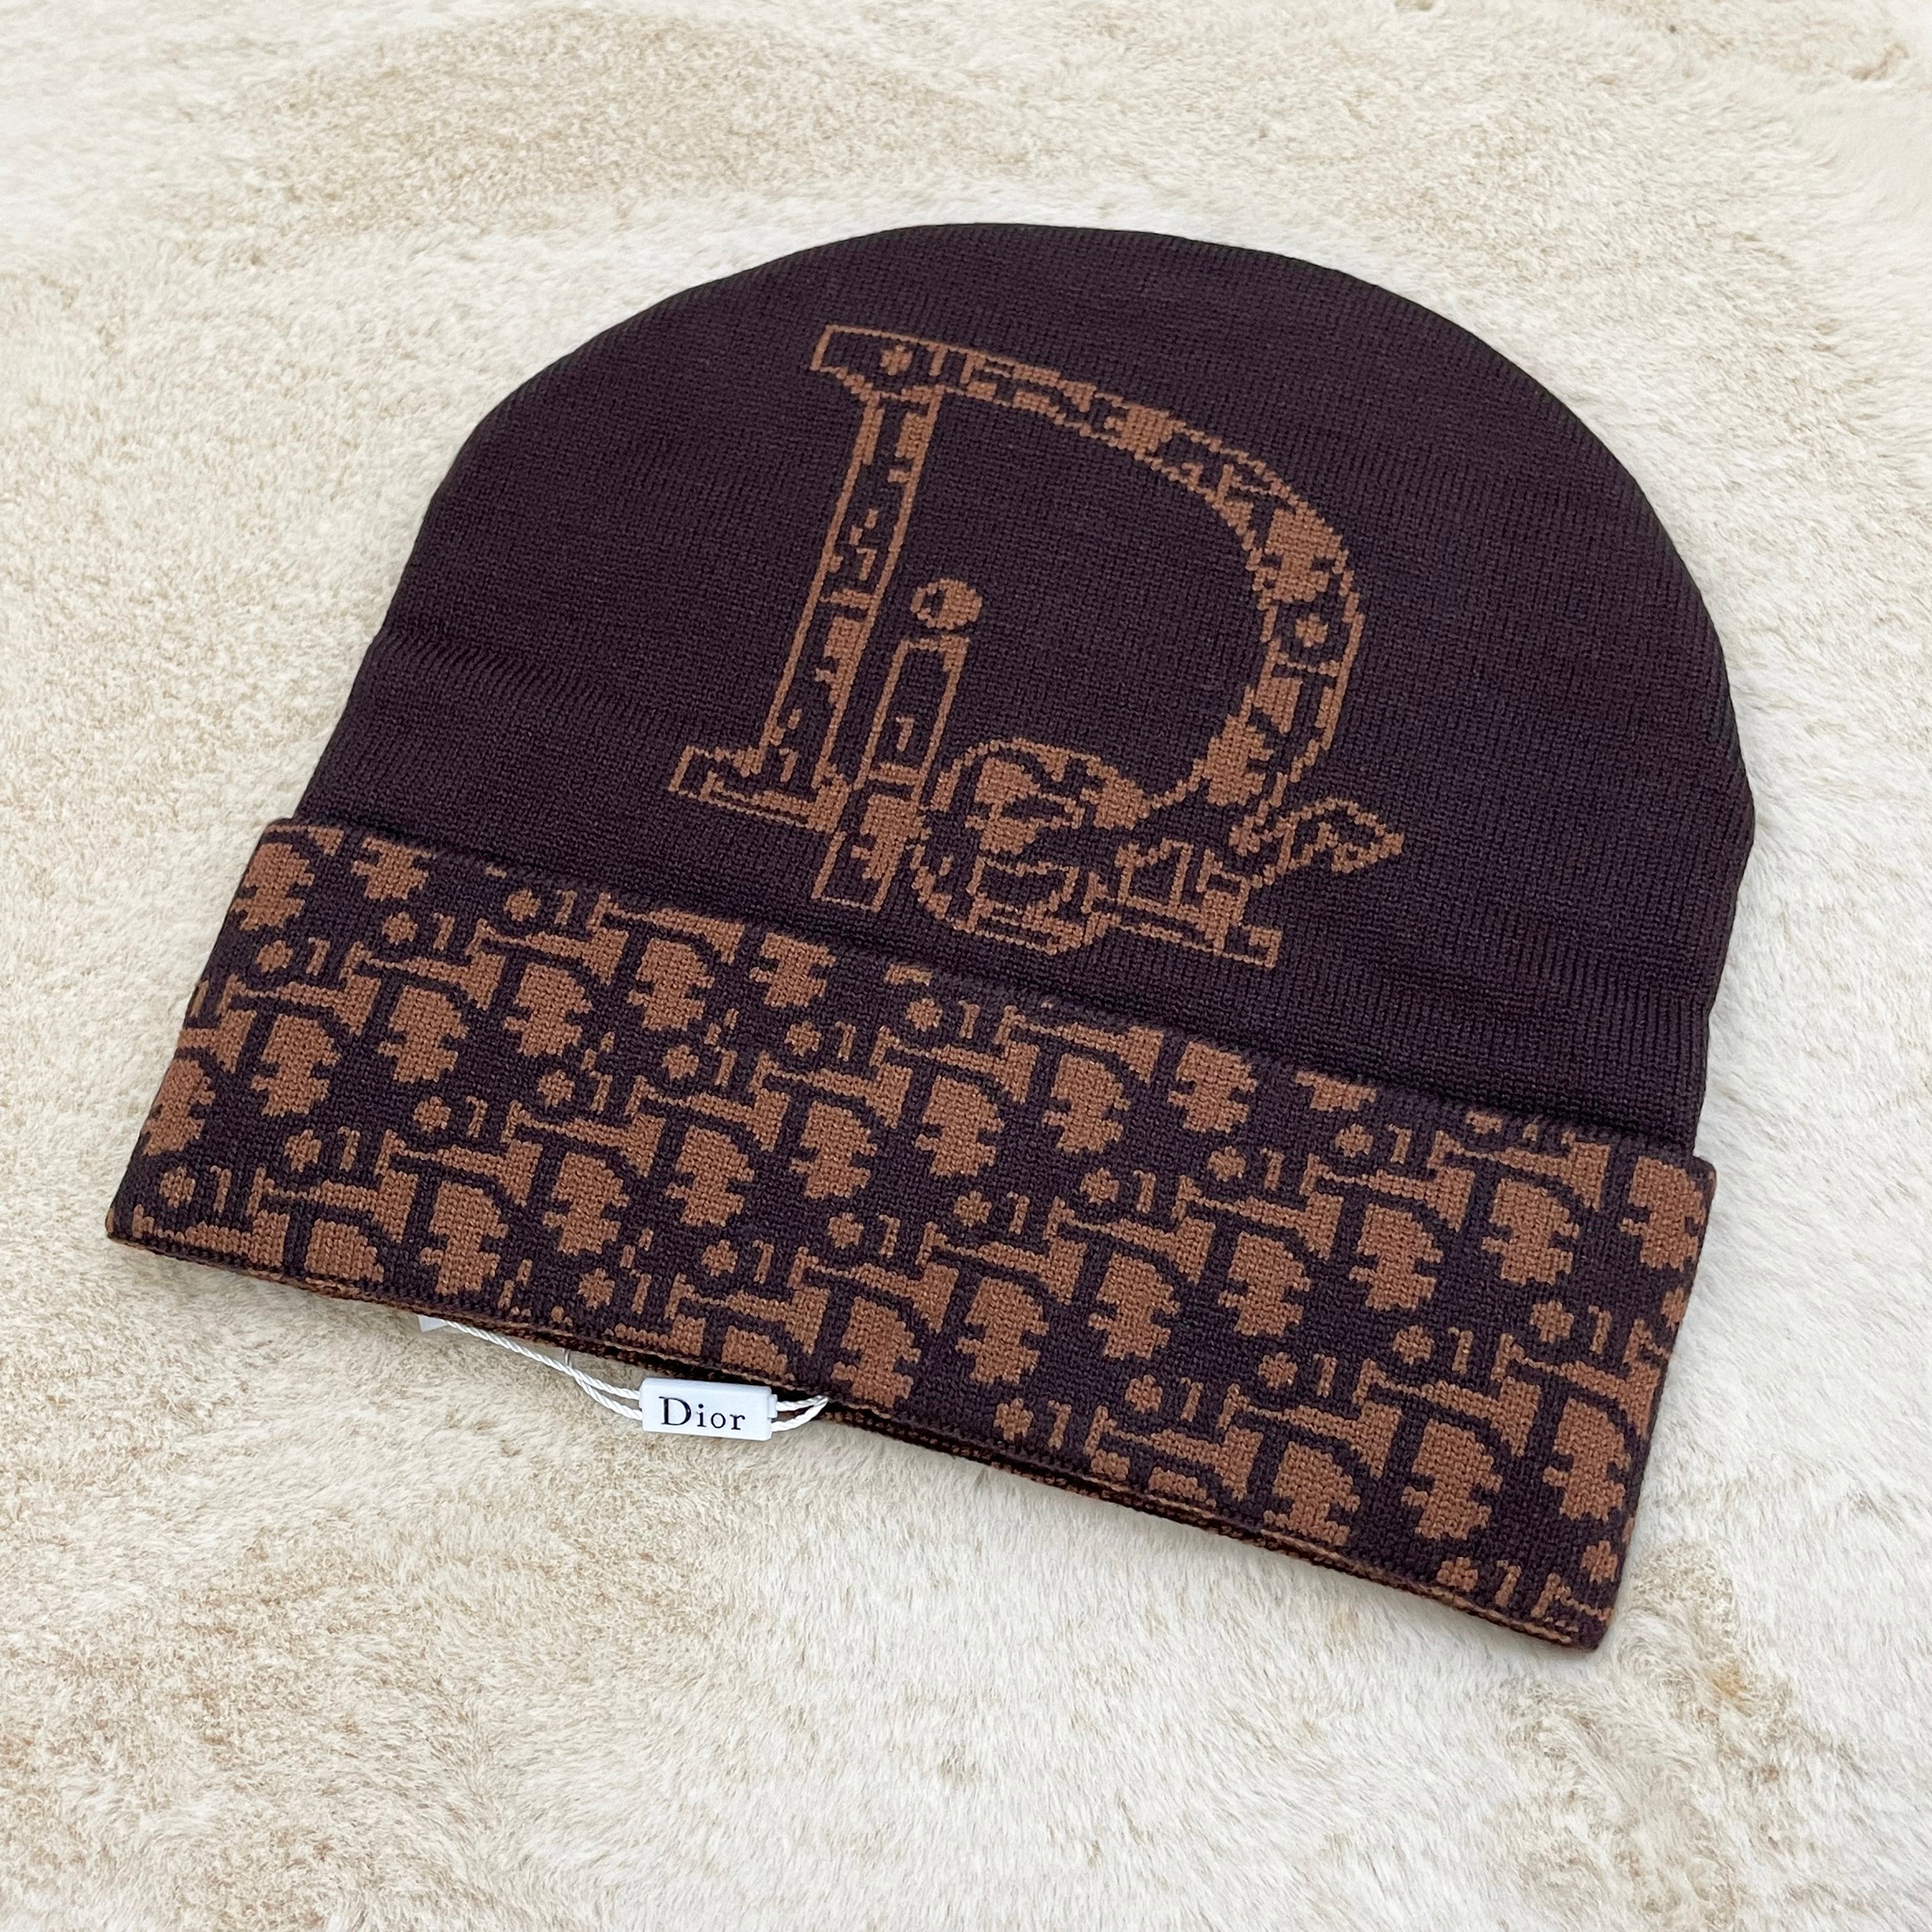 Christian Dior Fashion Embroidery Knitted Wool Hat Beans Cap